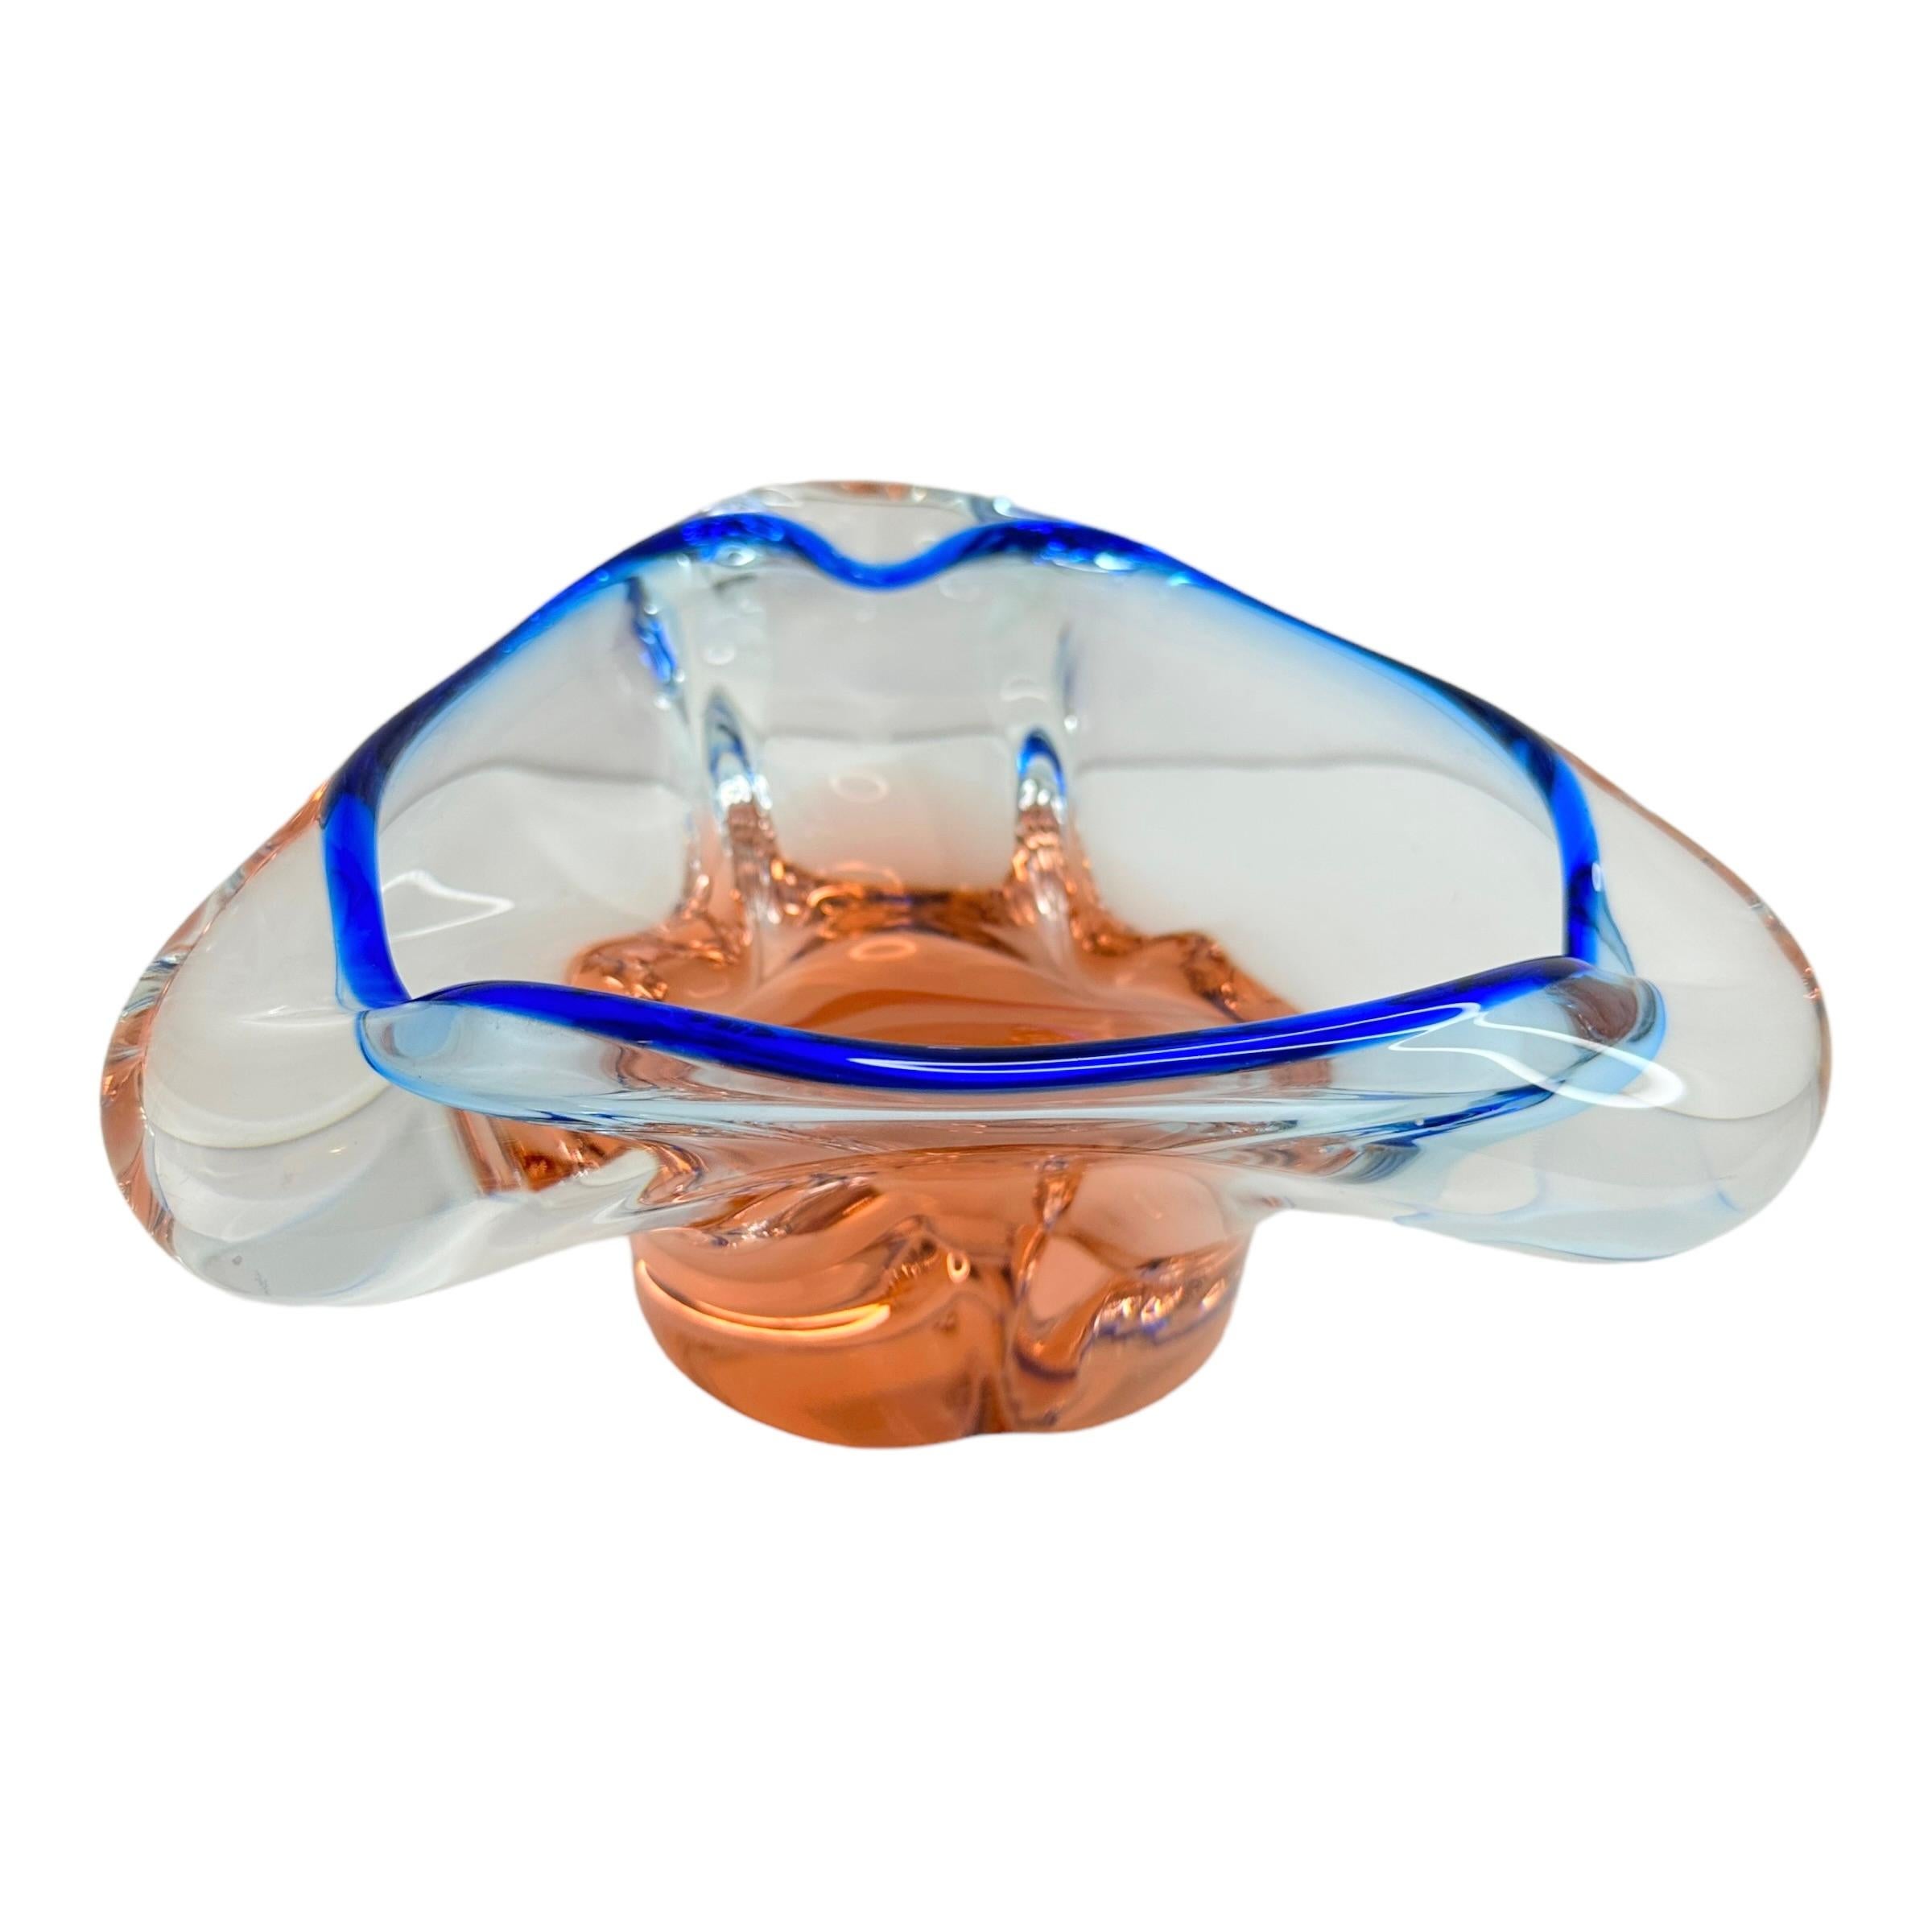 Gorgeous hand blown Murano art glass piece with Sommerso and bullicante techniques. A beautiful organic shaped bowl, catchall or centre piece, Venice, Murano, Italy, 1980s. Colors are apricot, Clear and blue. A nice addition to any room. Found at an